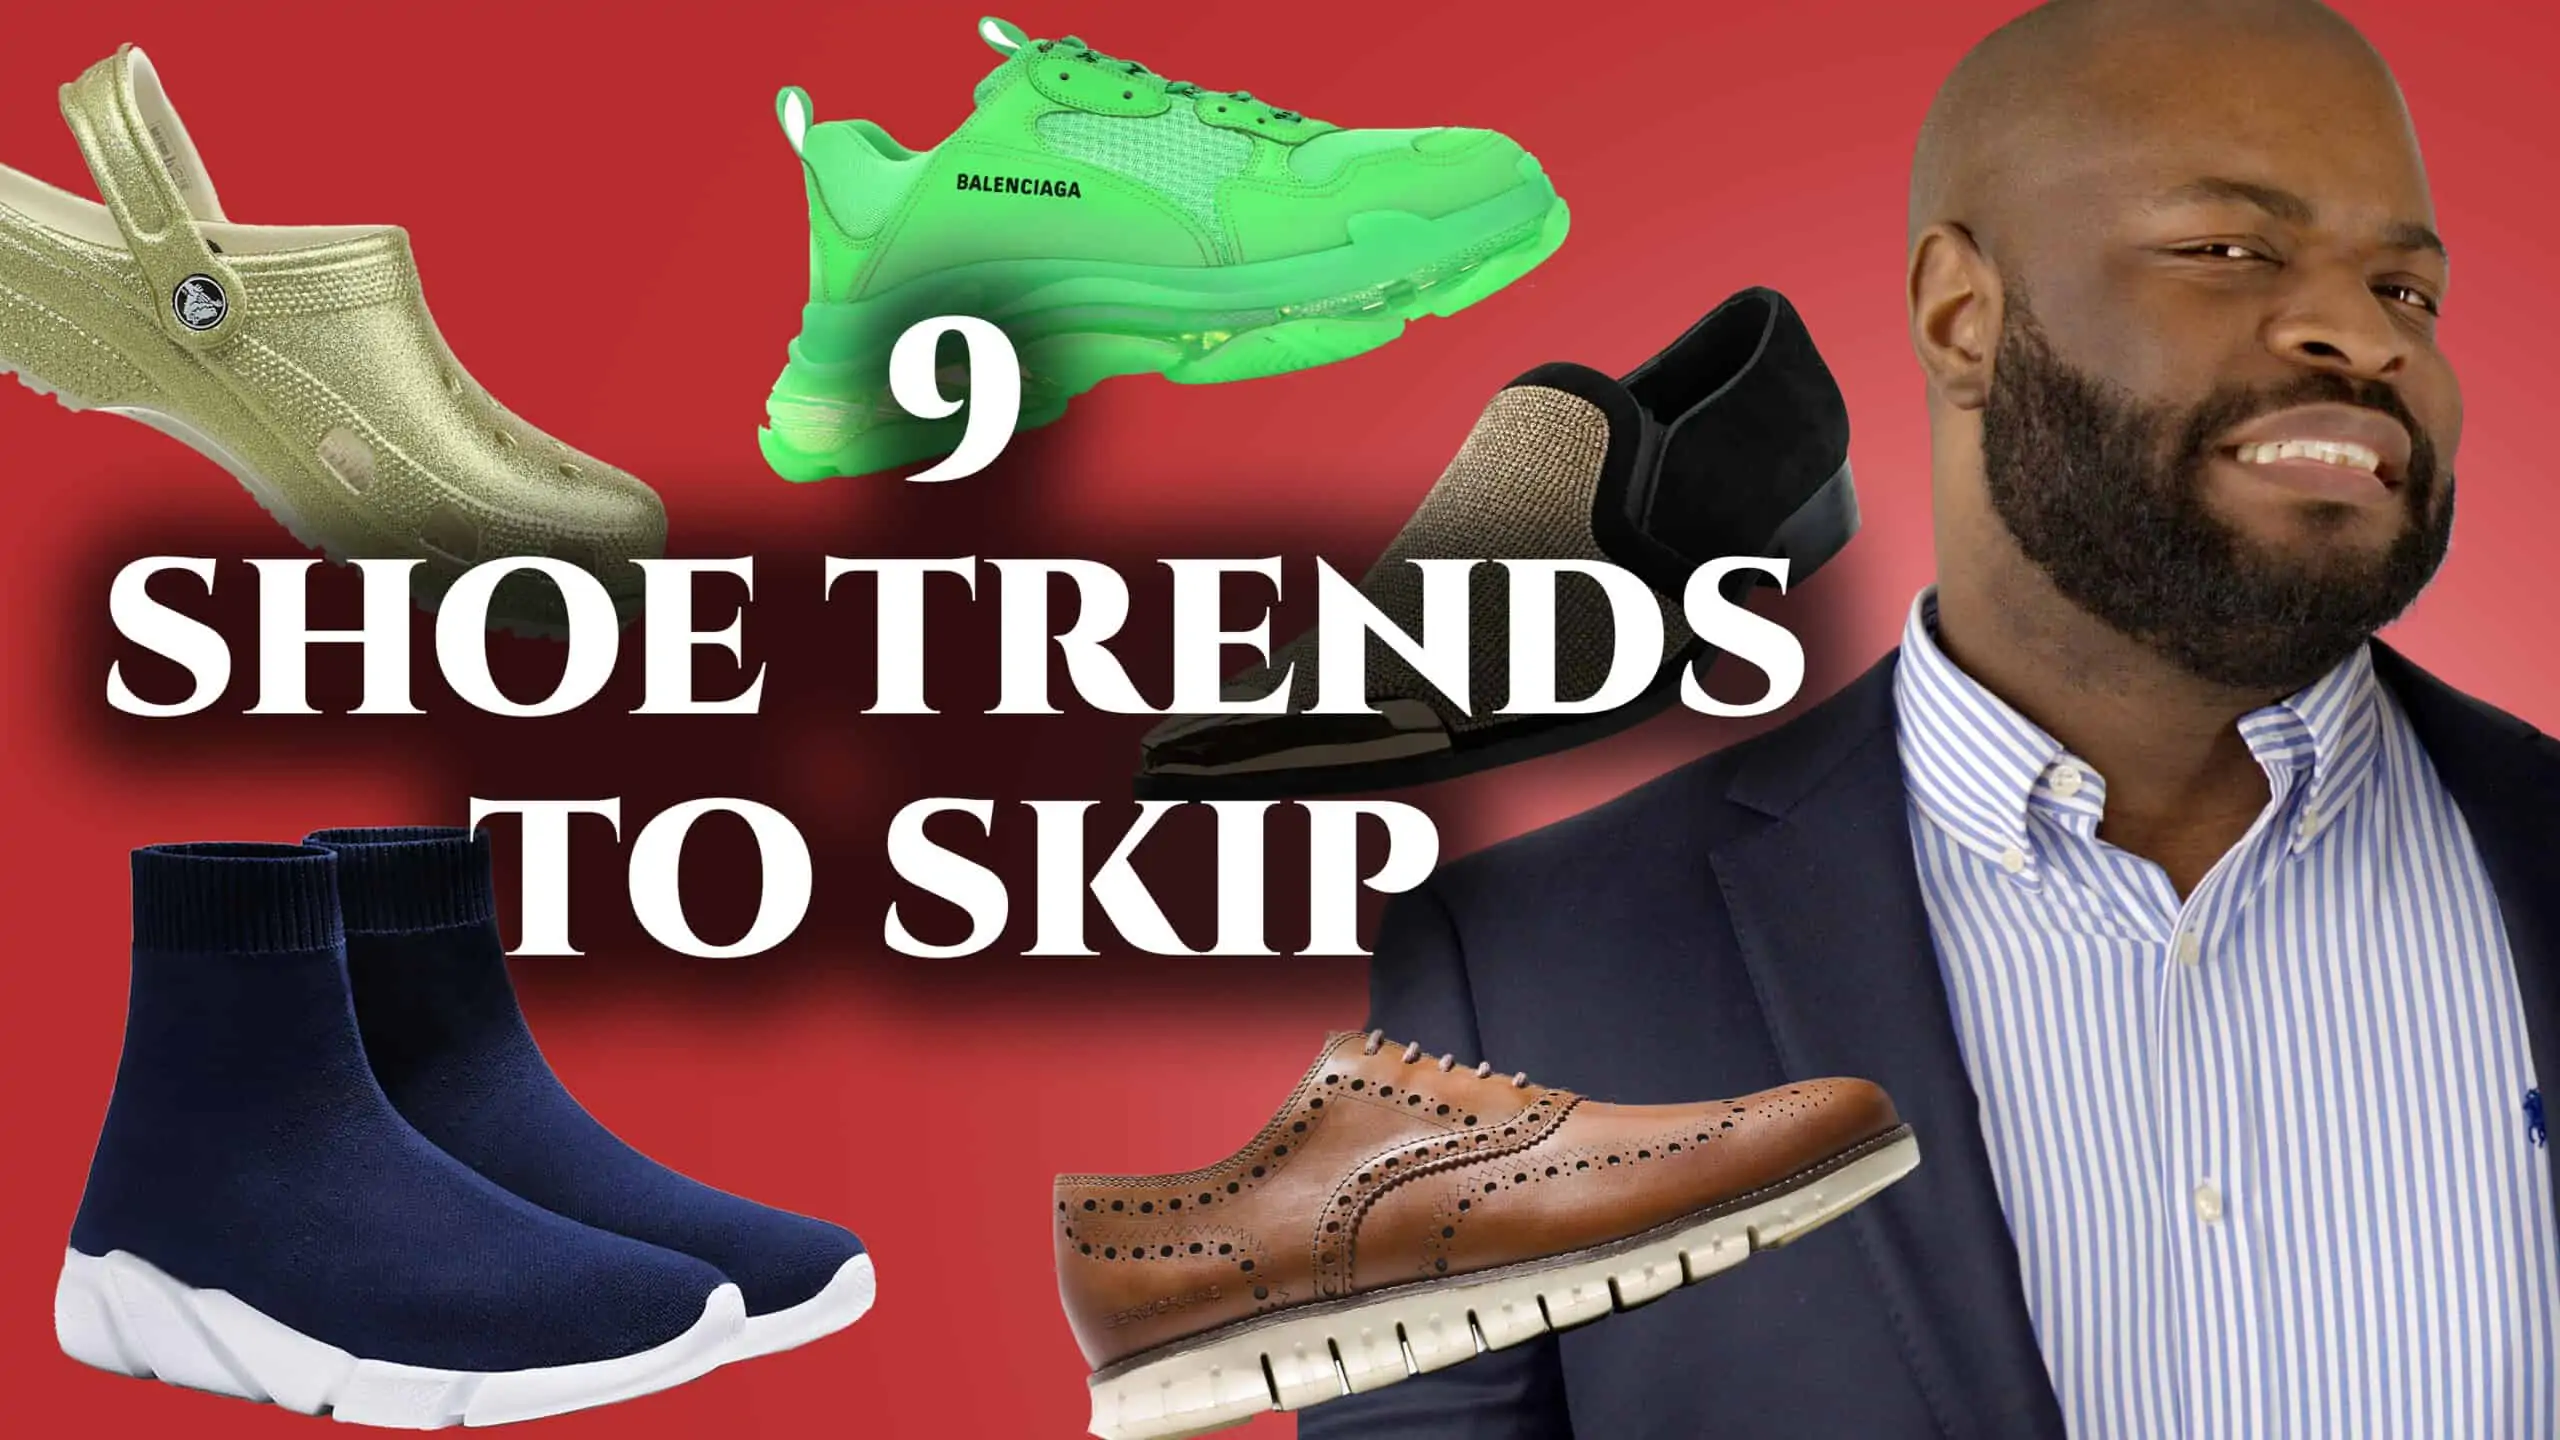 9 shoe trends to skip 3840x2160 scaled